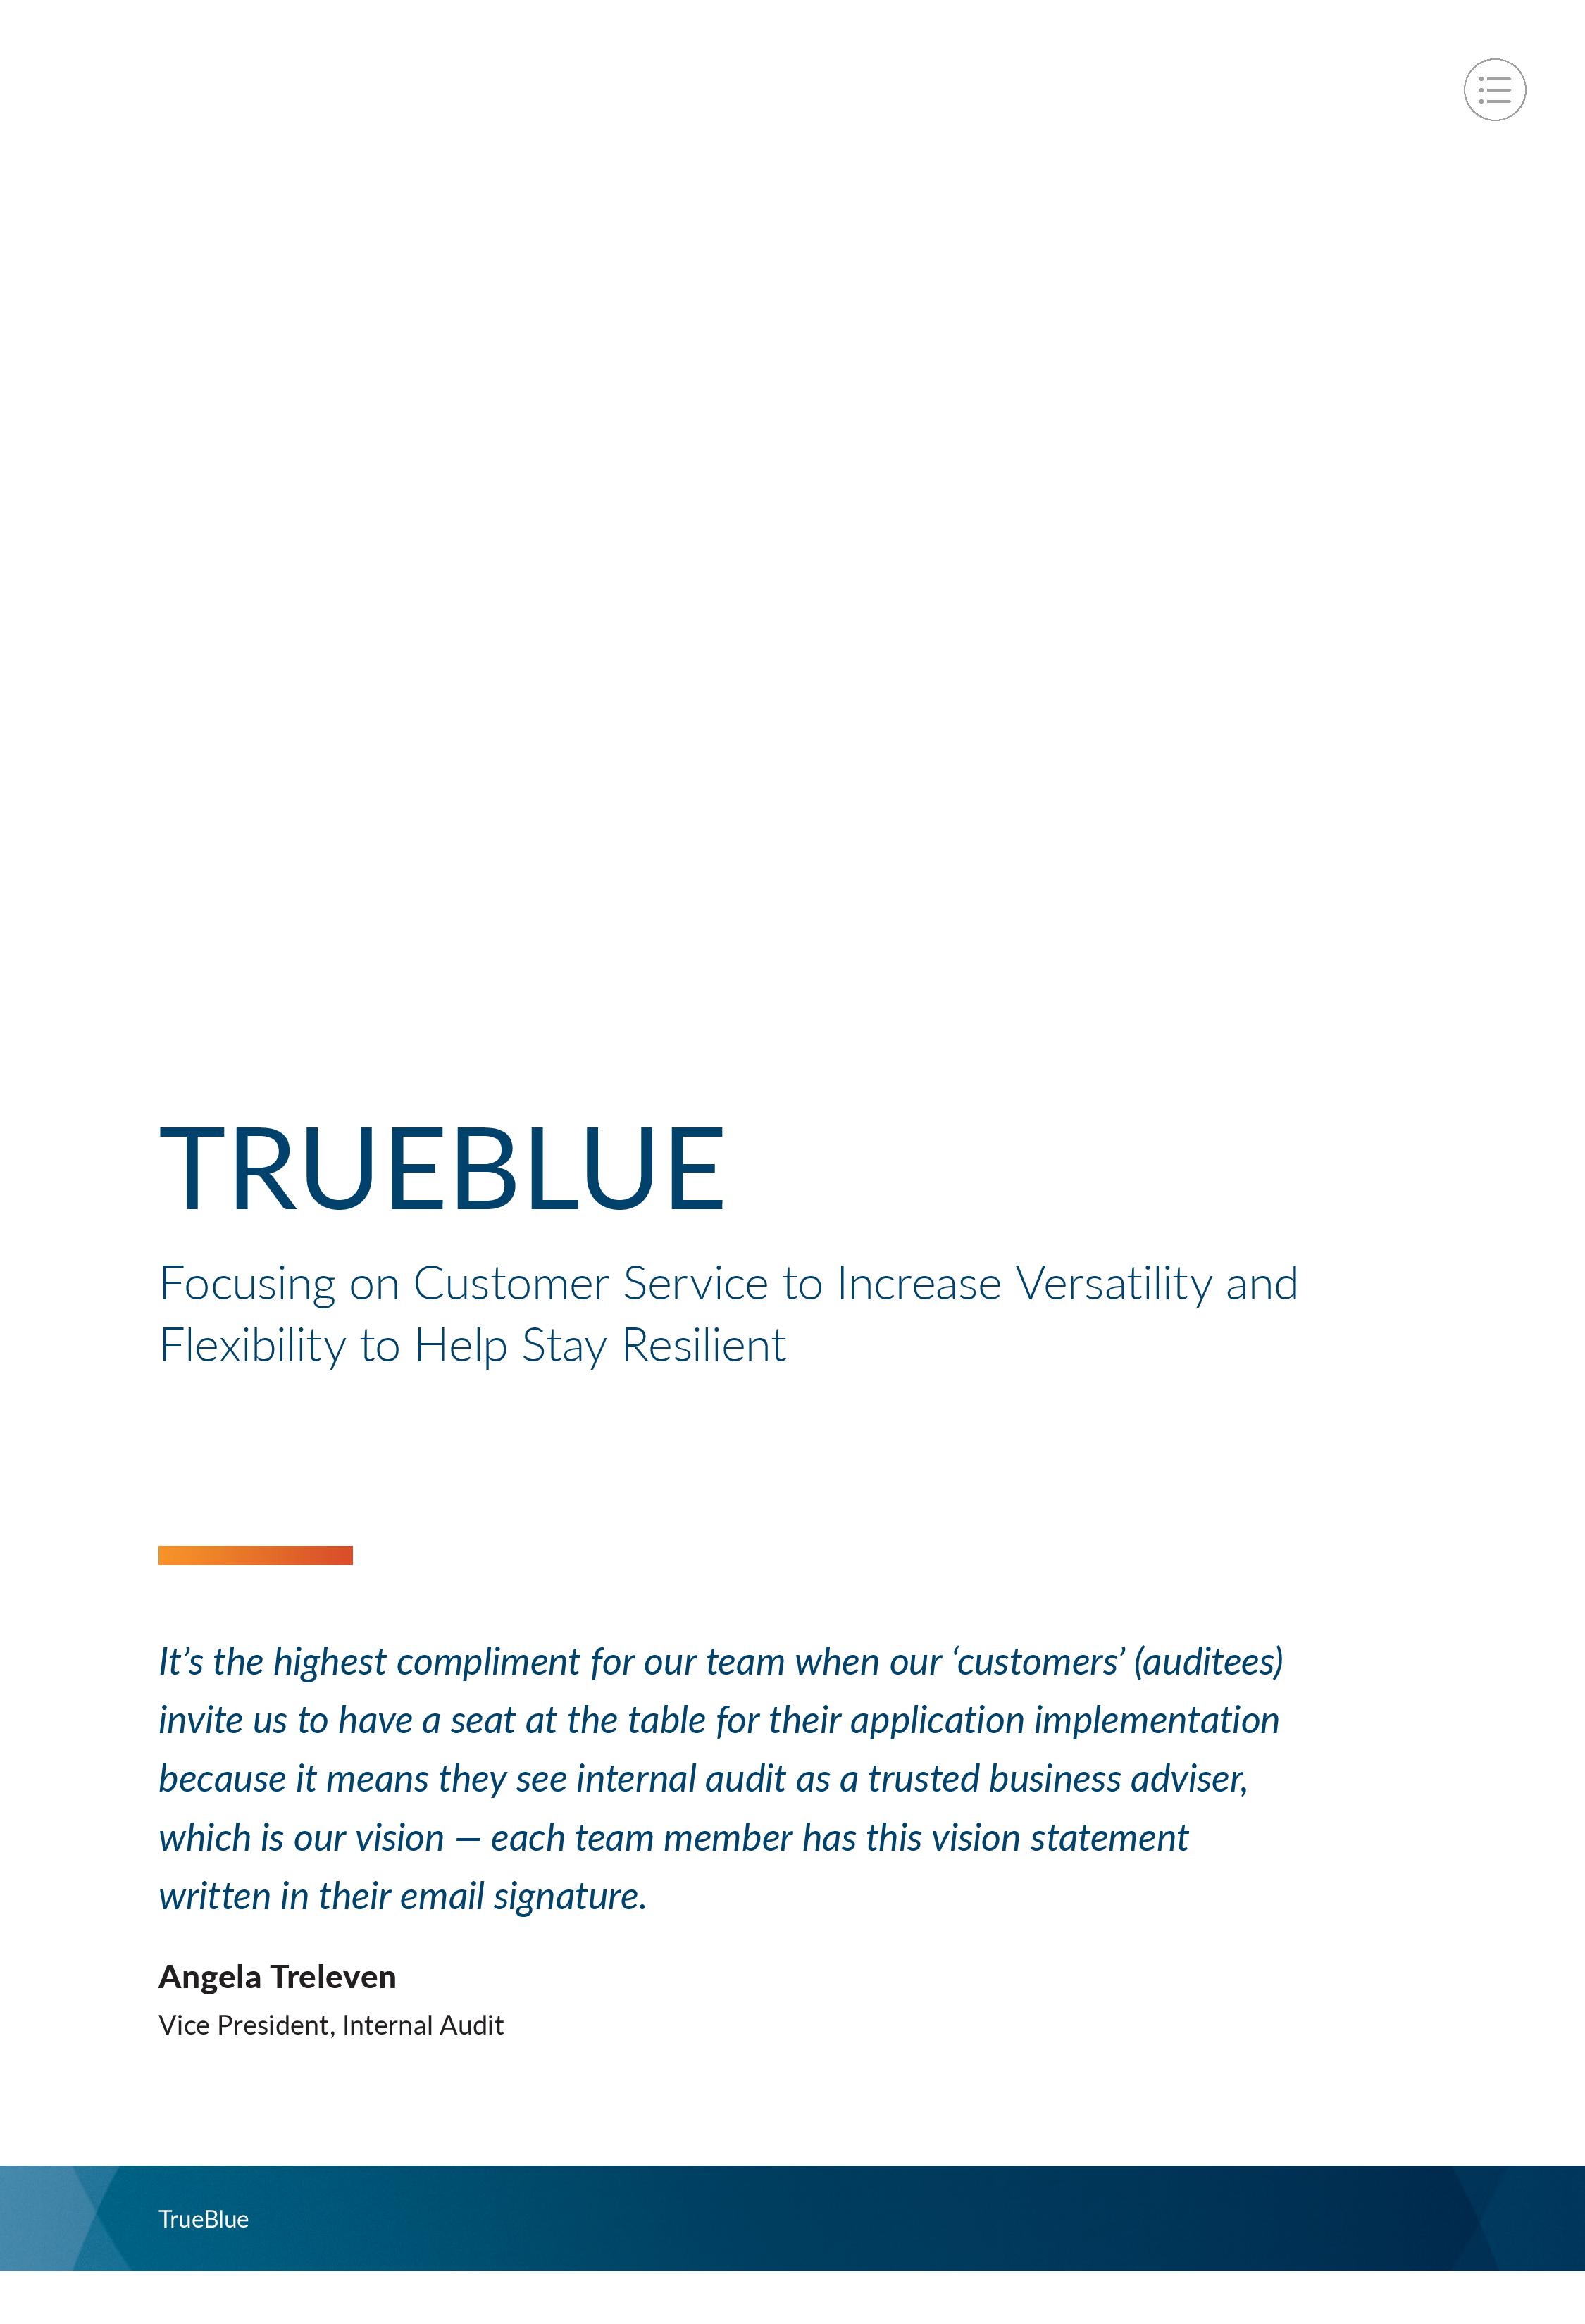 Screenshot of the first page of TrueBlue Inc.: Focusing on Customer Service to Increase Versatility and Flexibility to Help Stay Resilient